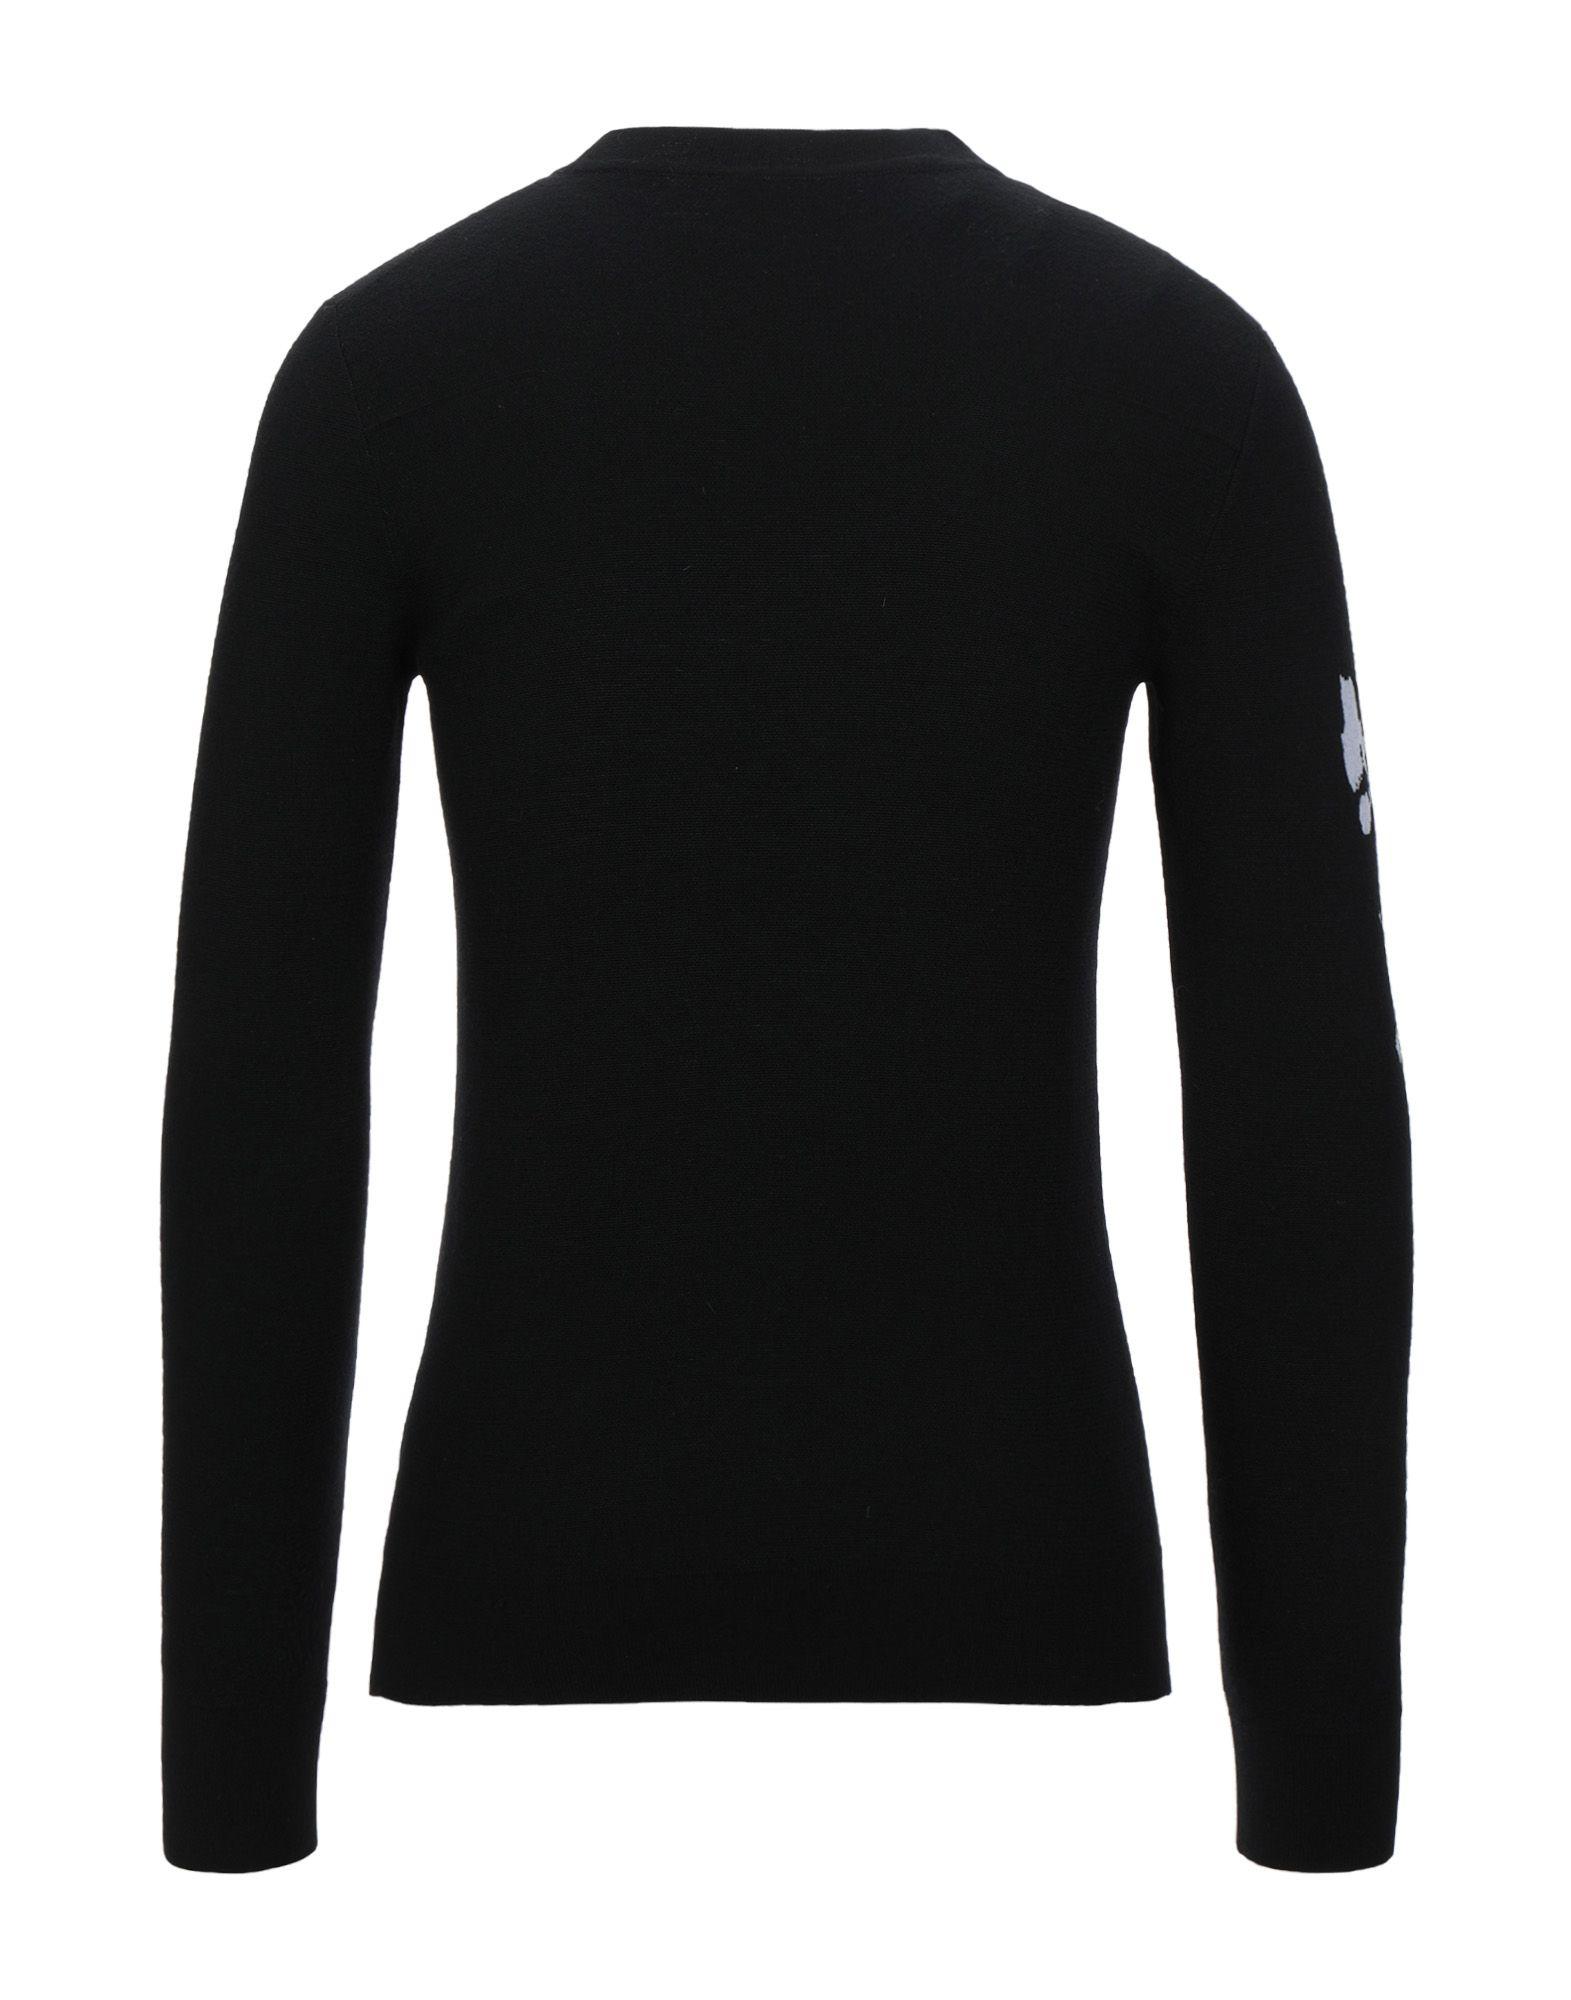 Dior Sweater in Black for Men - Lyst